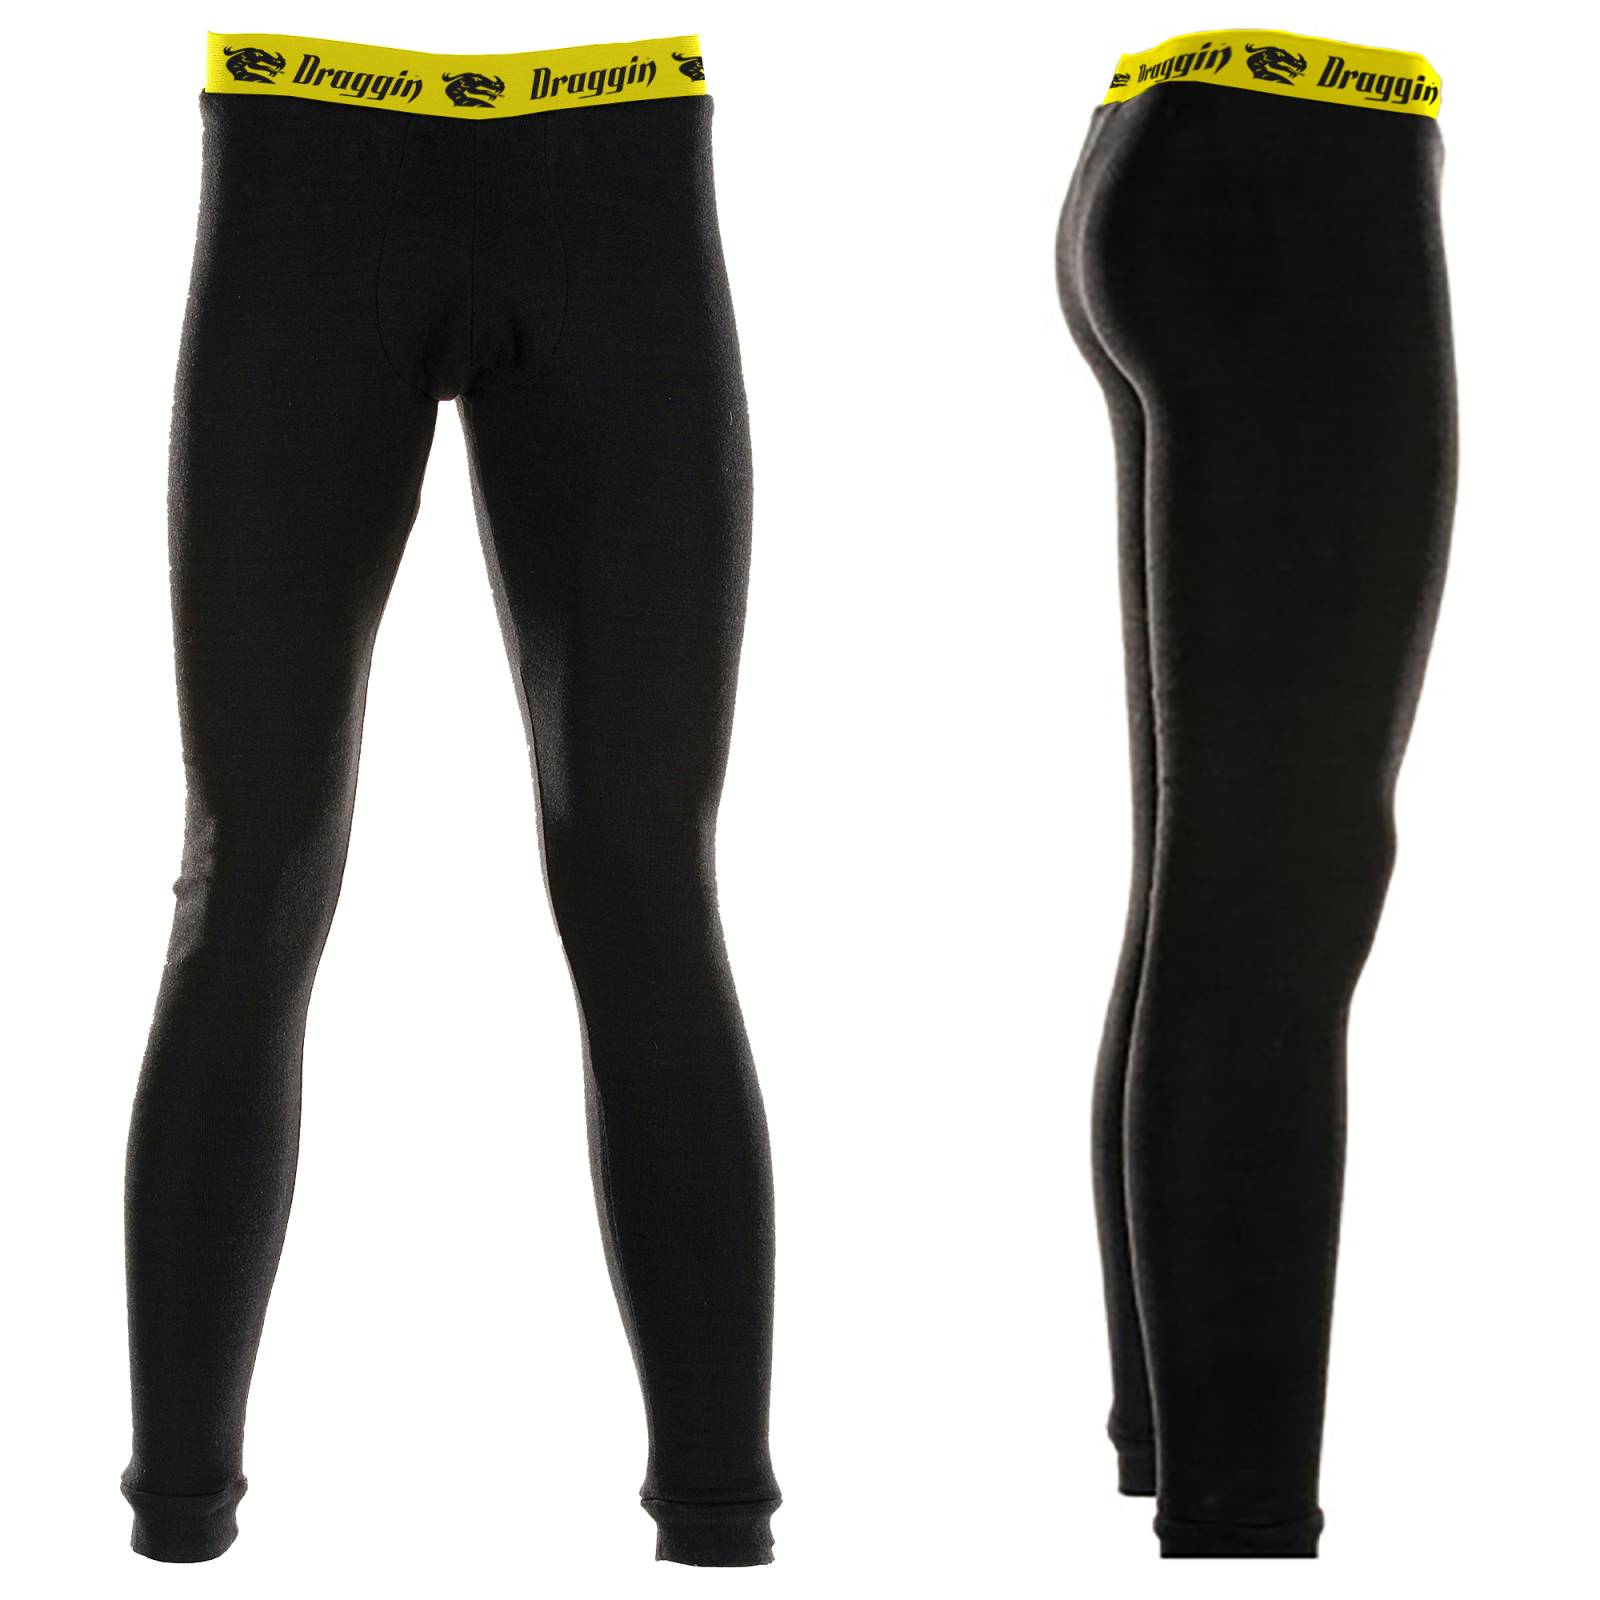 Super Leggings Dupont Made With Kevlar Rider Pants L 29Inch Waist 32 In Hip  29In